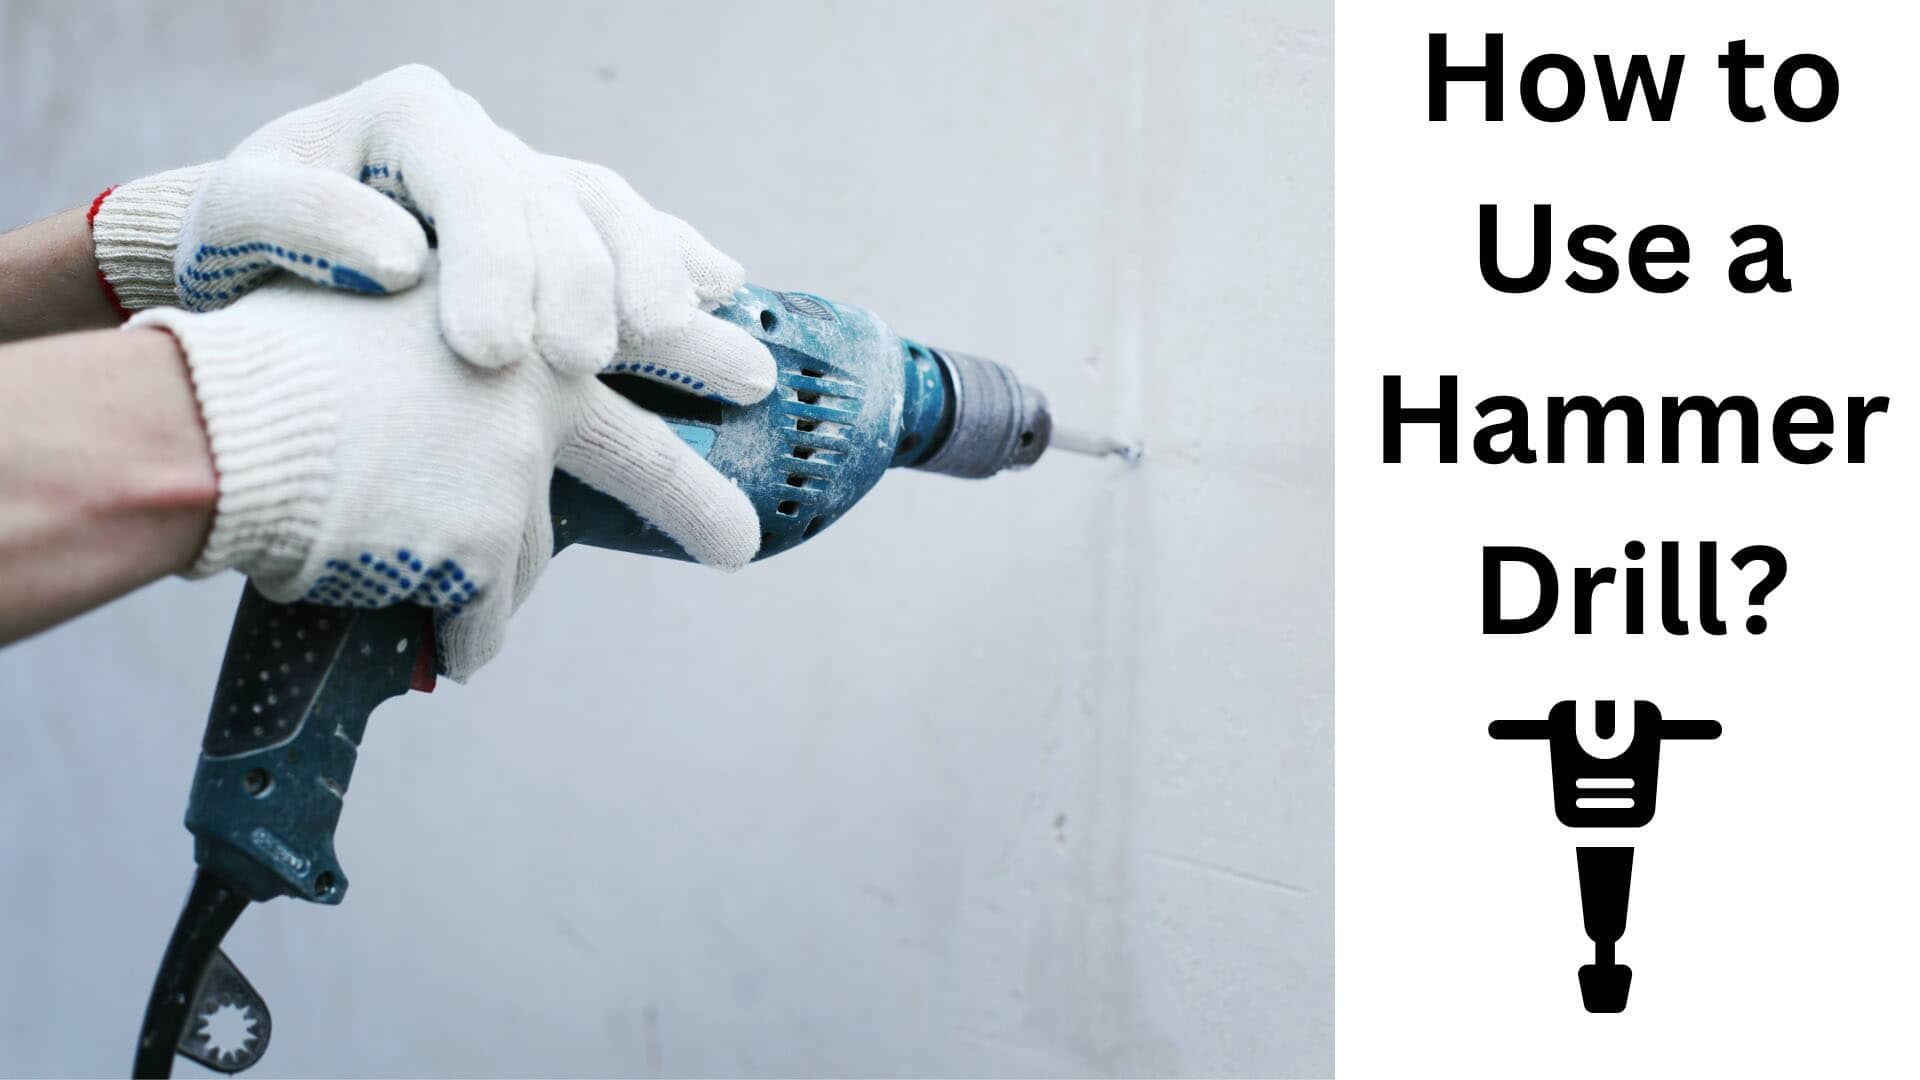 how to use a hammer drill?